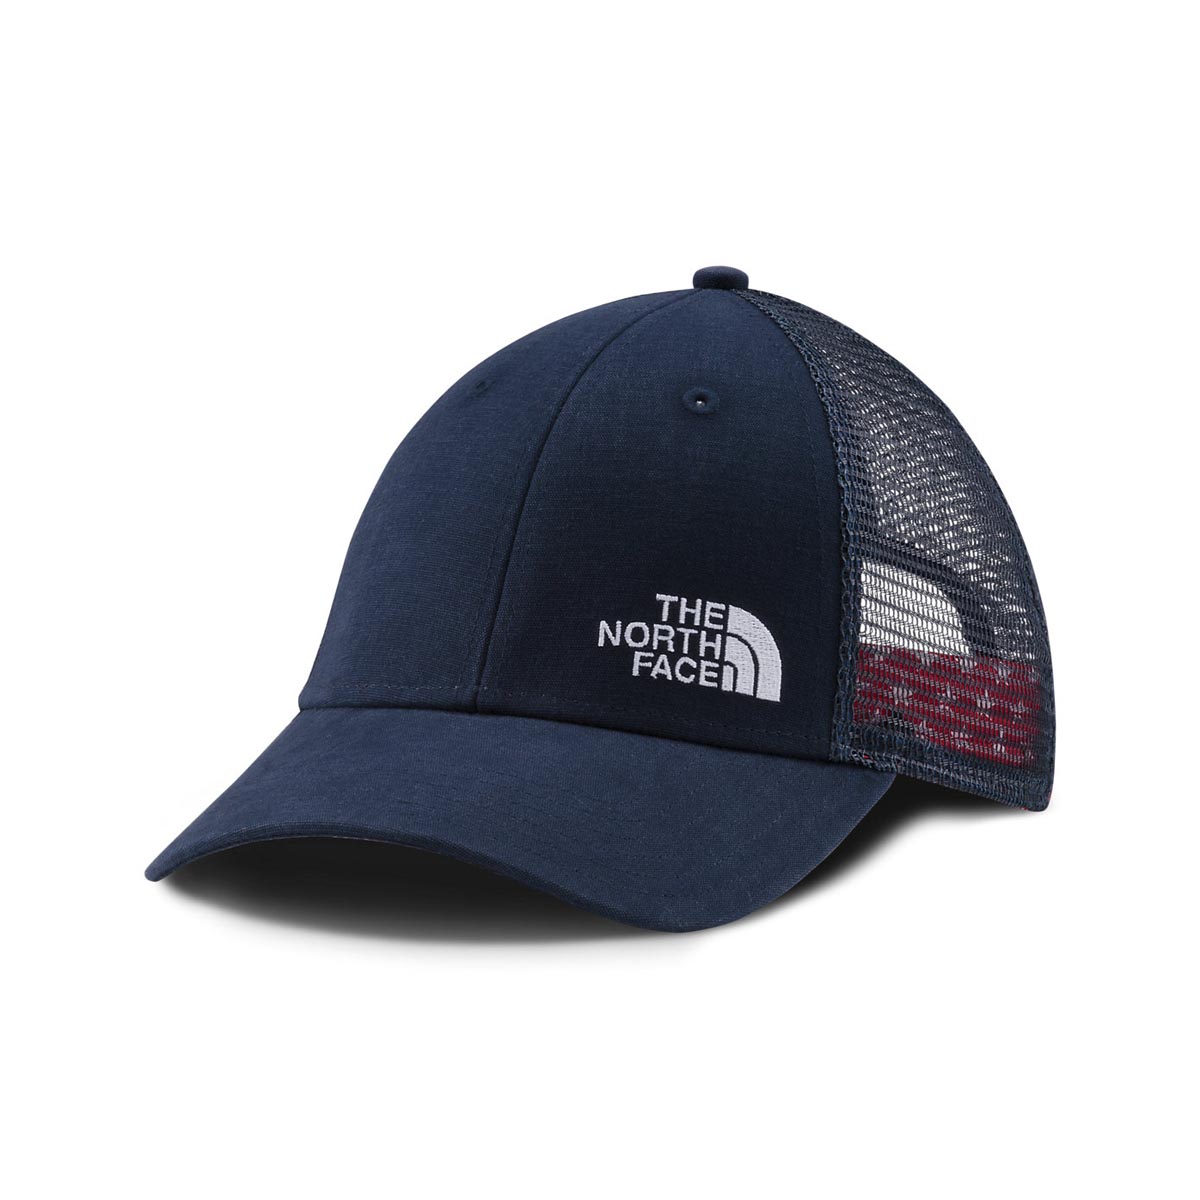 The North Face USA Trucker Hat